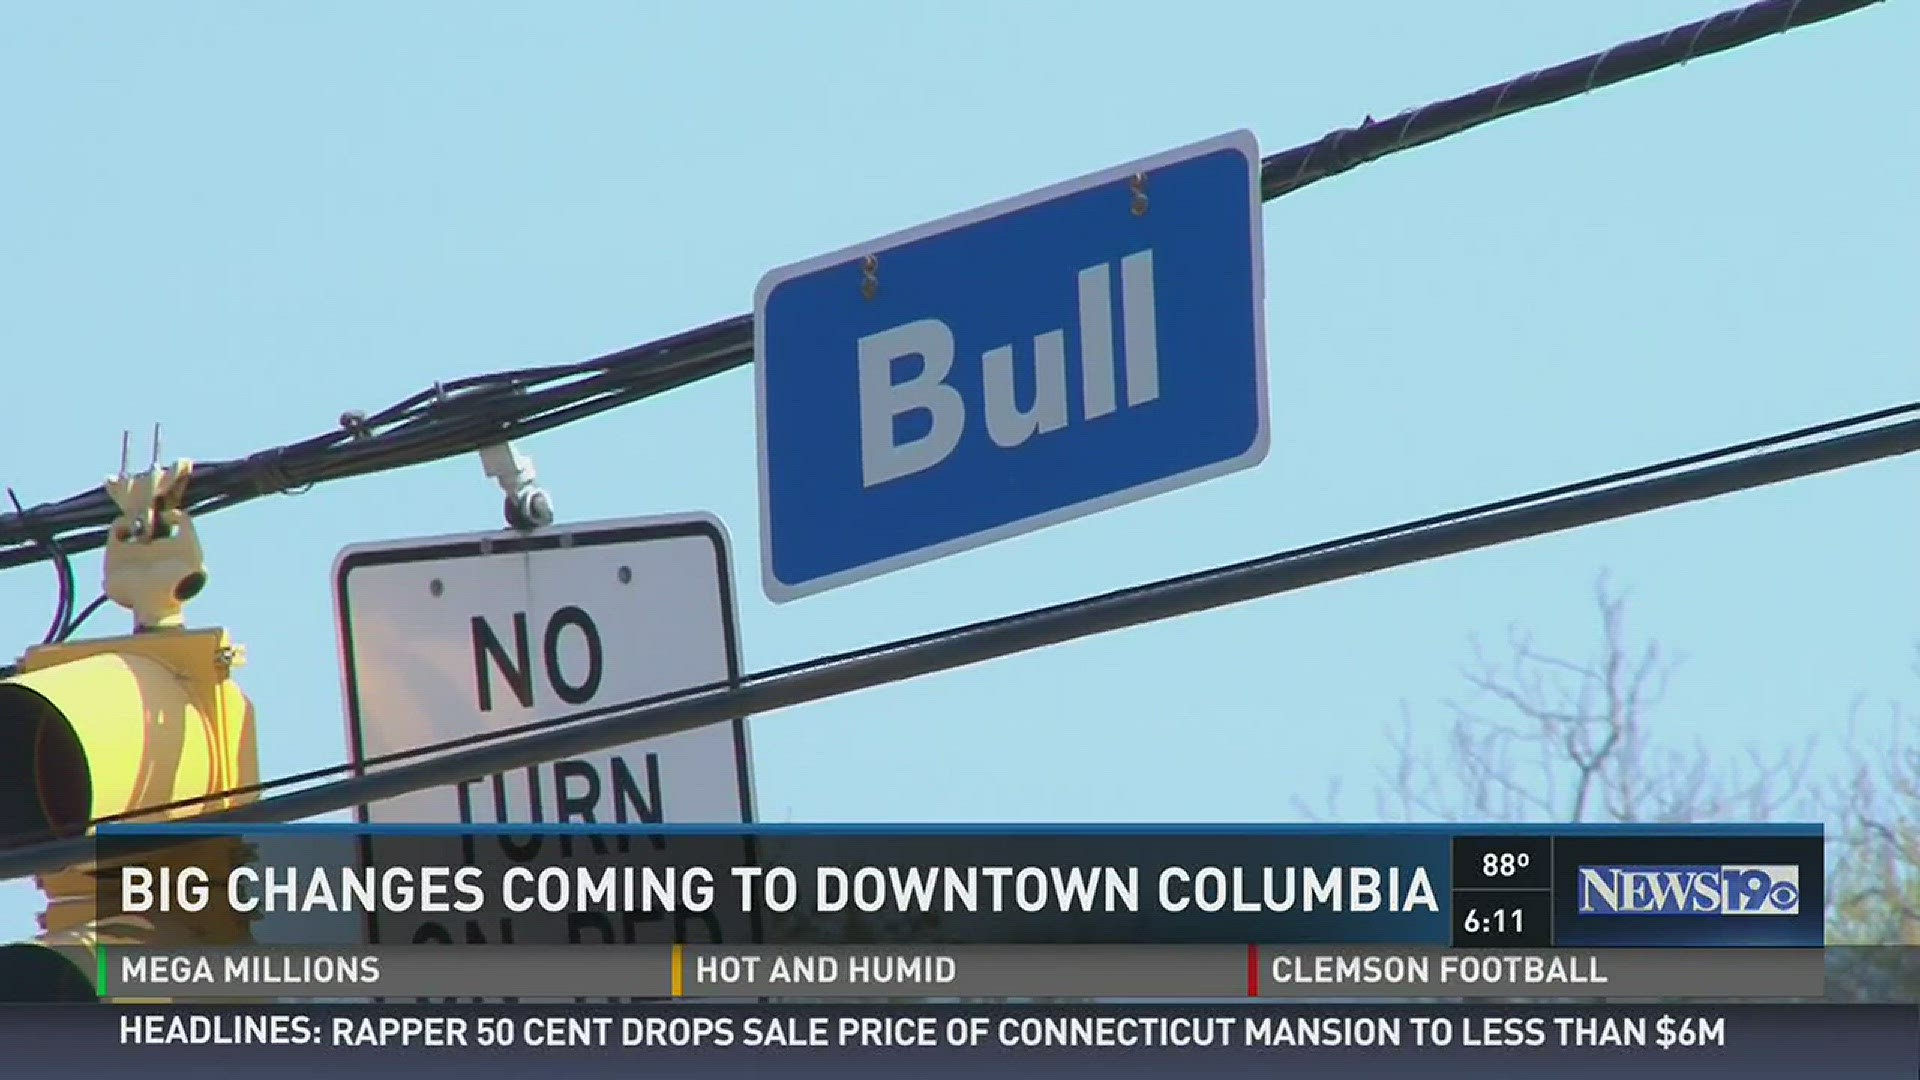 Big changed coming to downtown Columbia on Bull Street.